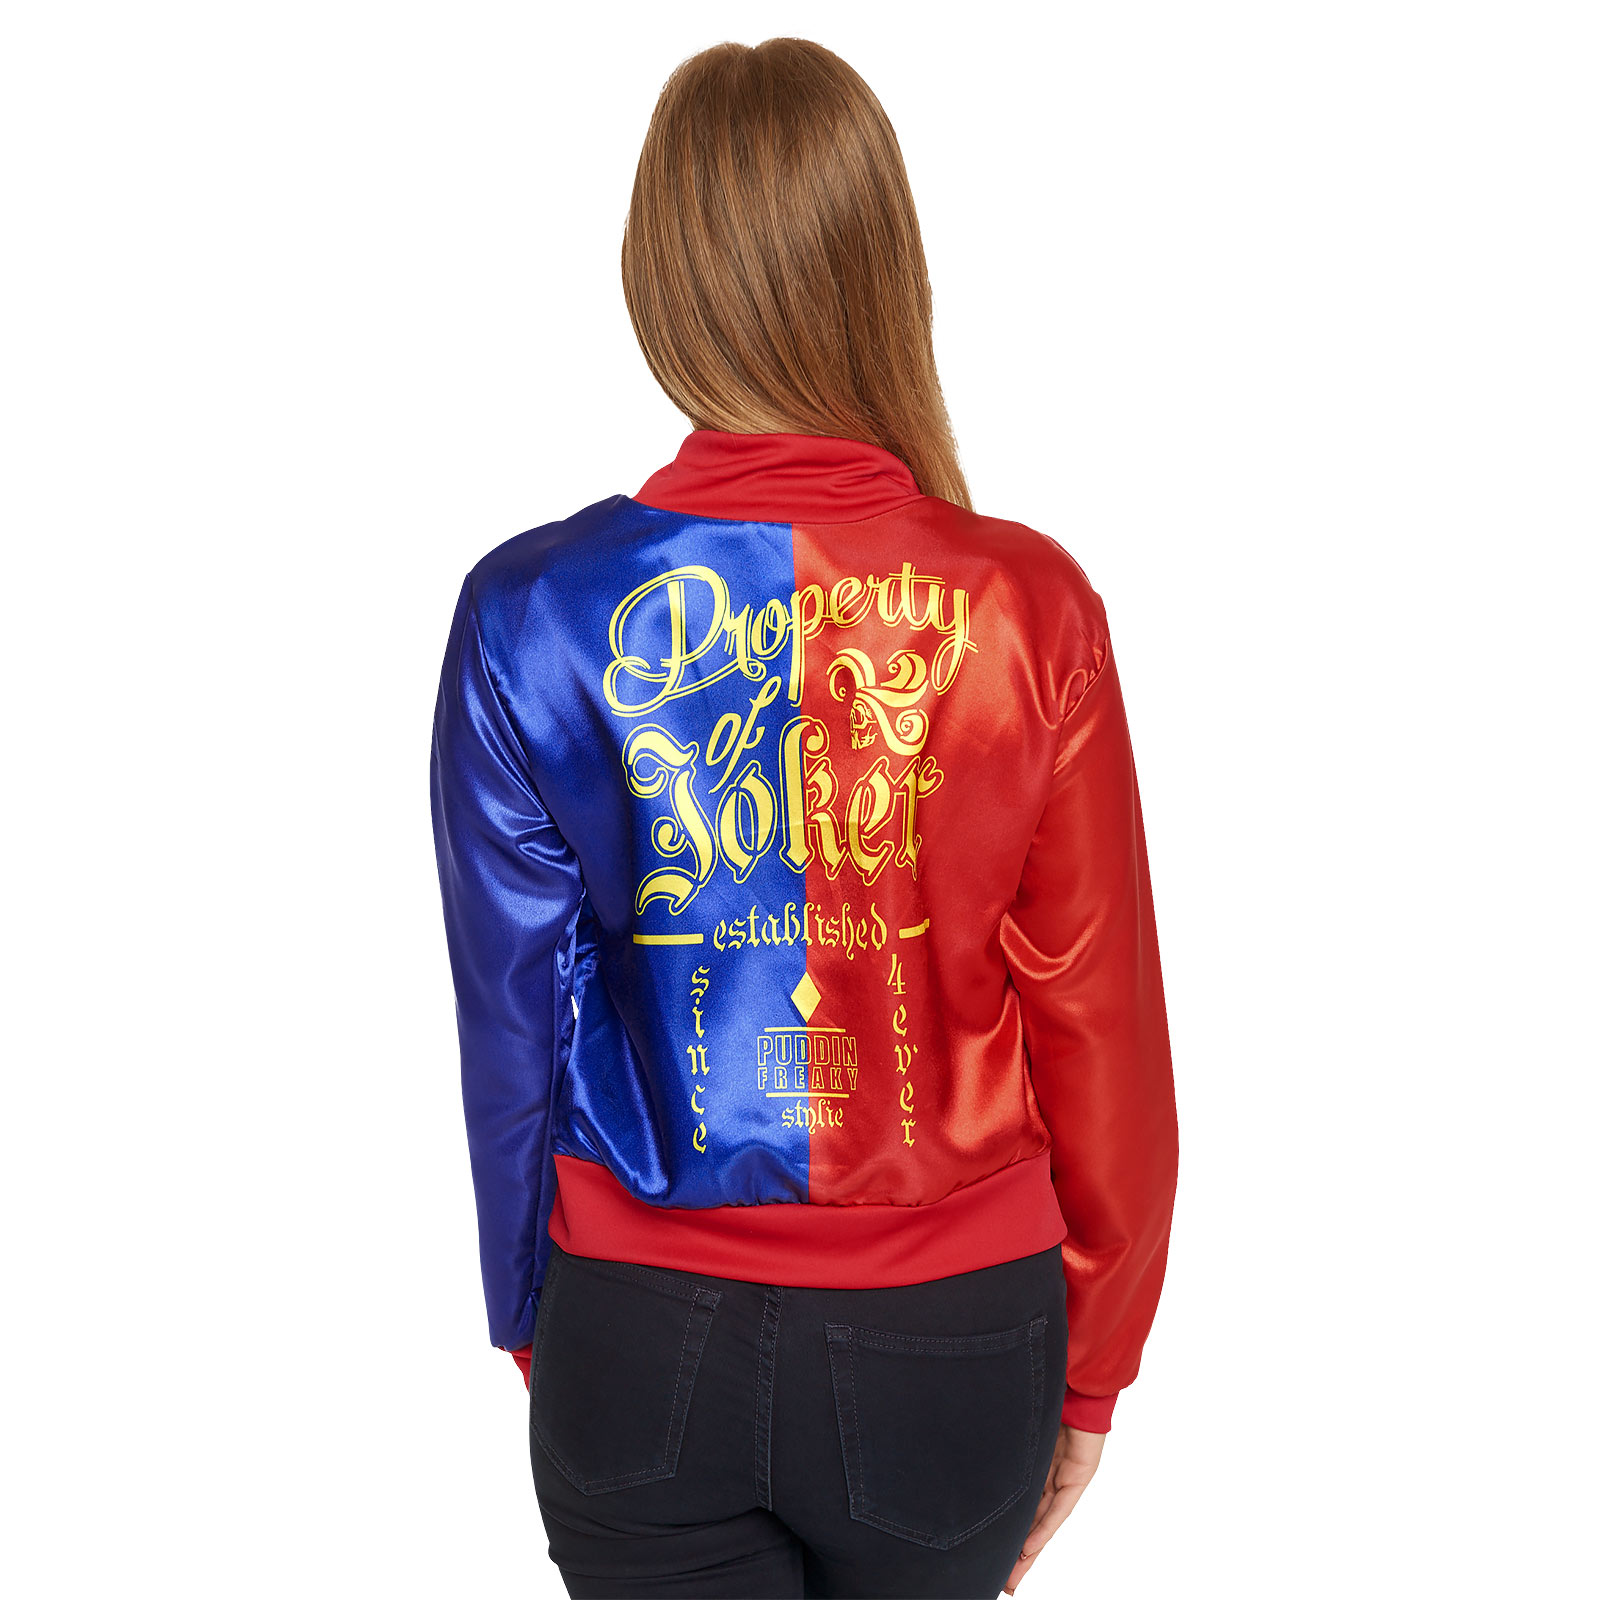 Suicide Squad - Harley Quinn Costume Jacket Women